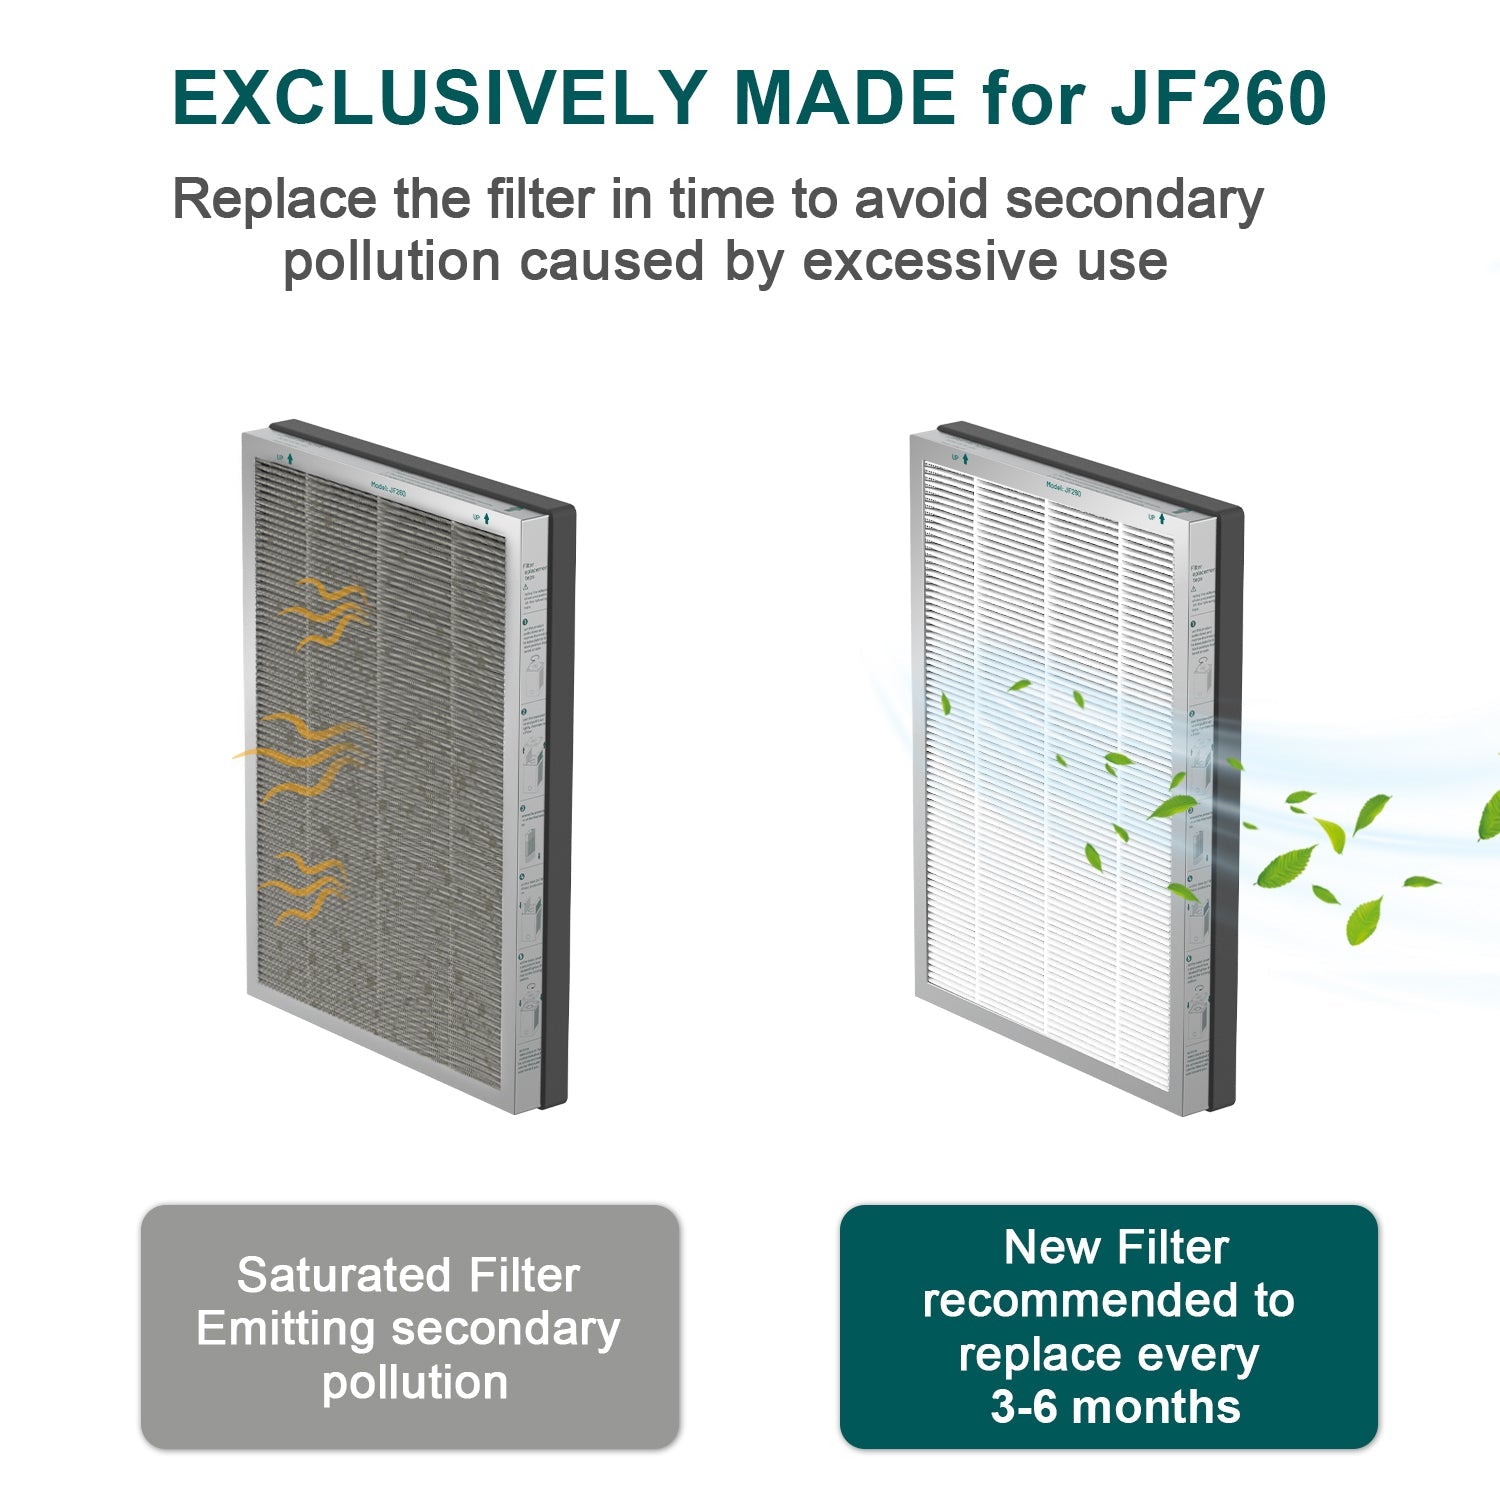 JF260 & JF260s Air Purifier Filter Replacement - True HEPA and Activated Carbon Filter - Removes 99.7% of Smoke, Dust, Pollen, and Odors - Jafanda